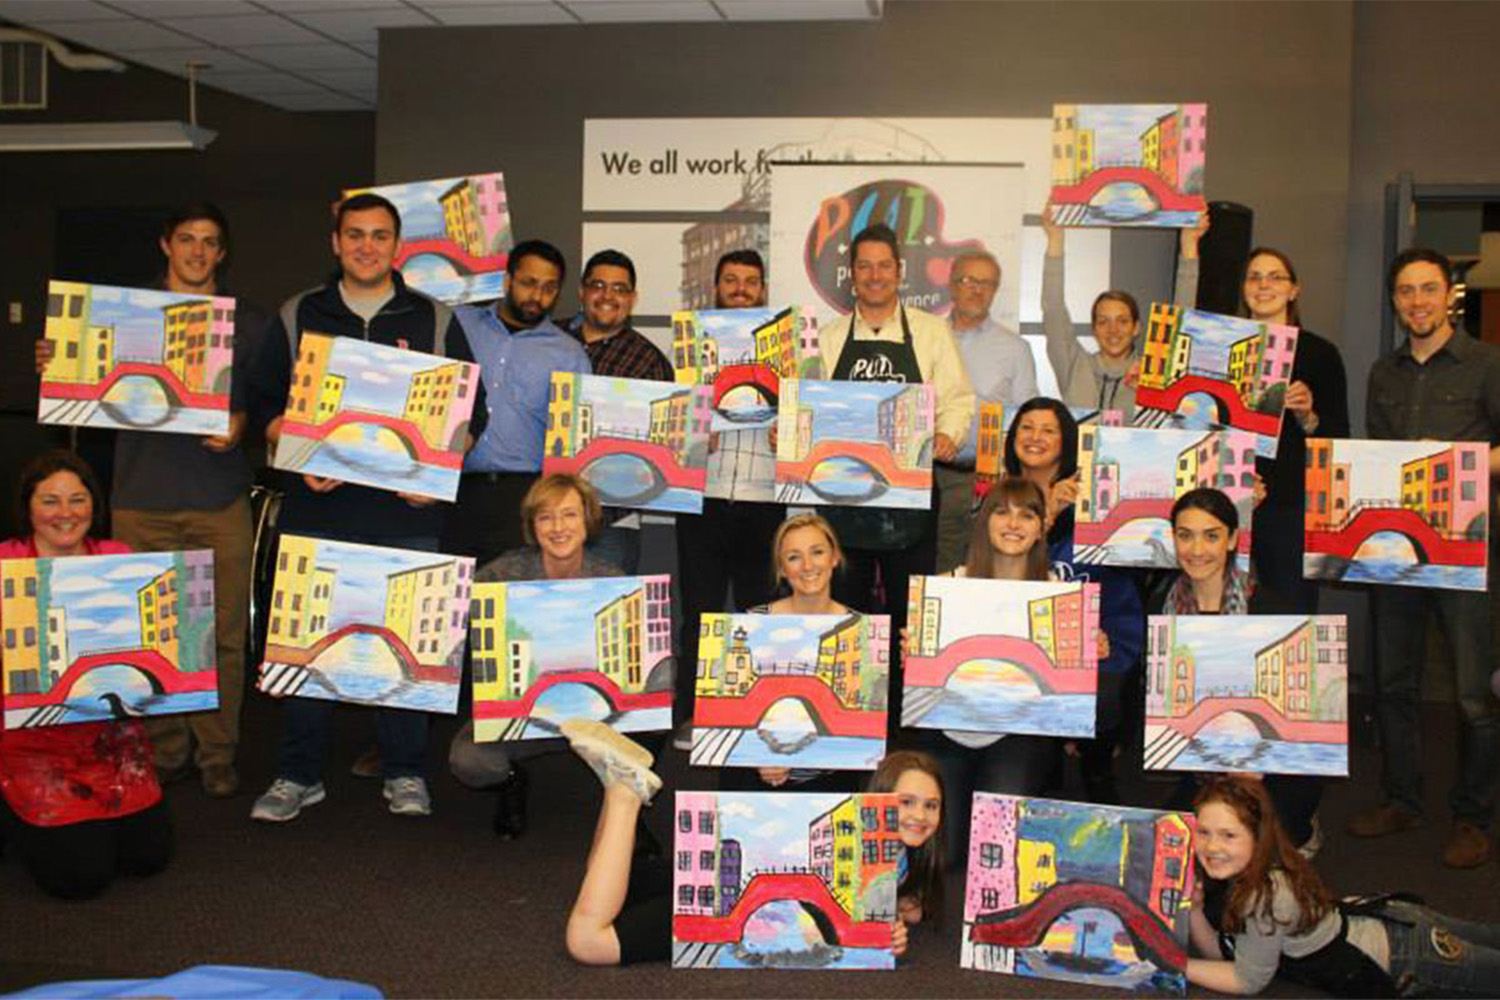 Tocci employees pose for group photo while holding up paintings 